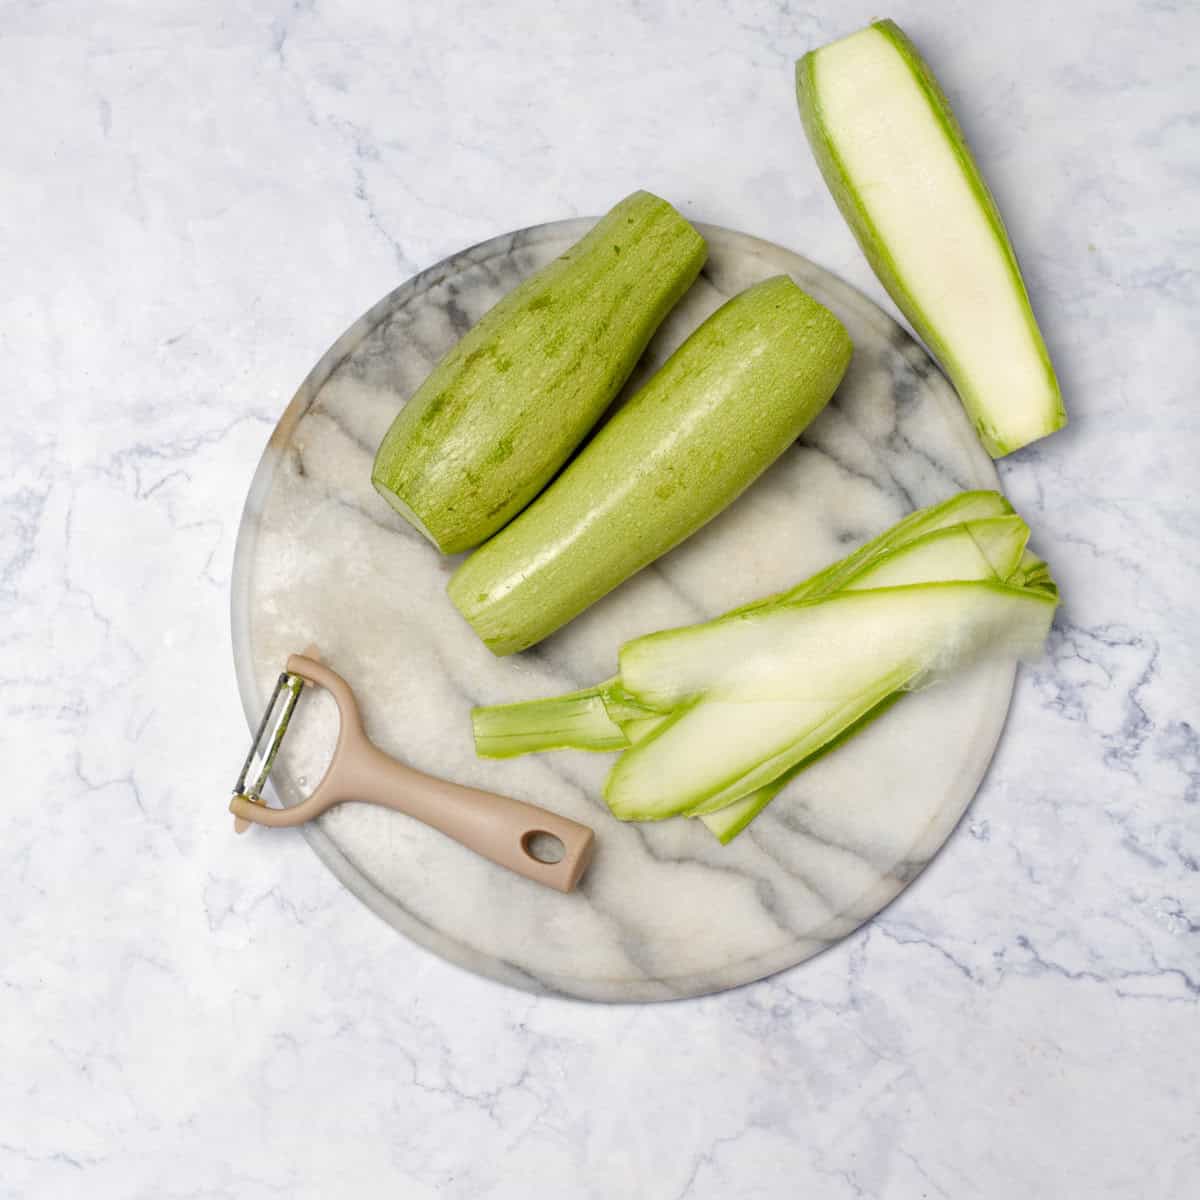 Zucchini placed on board with slicer